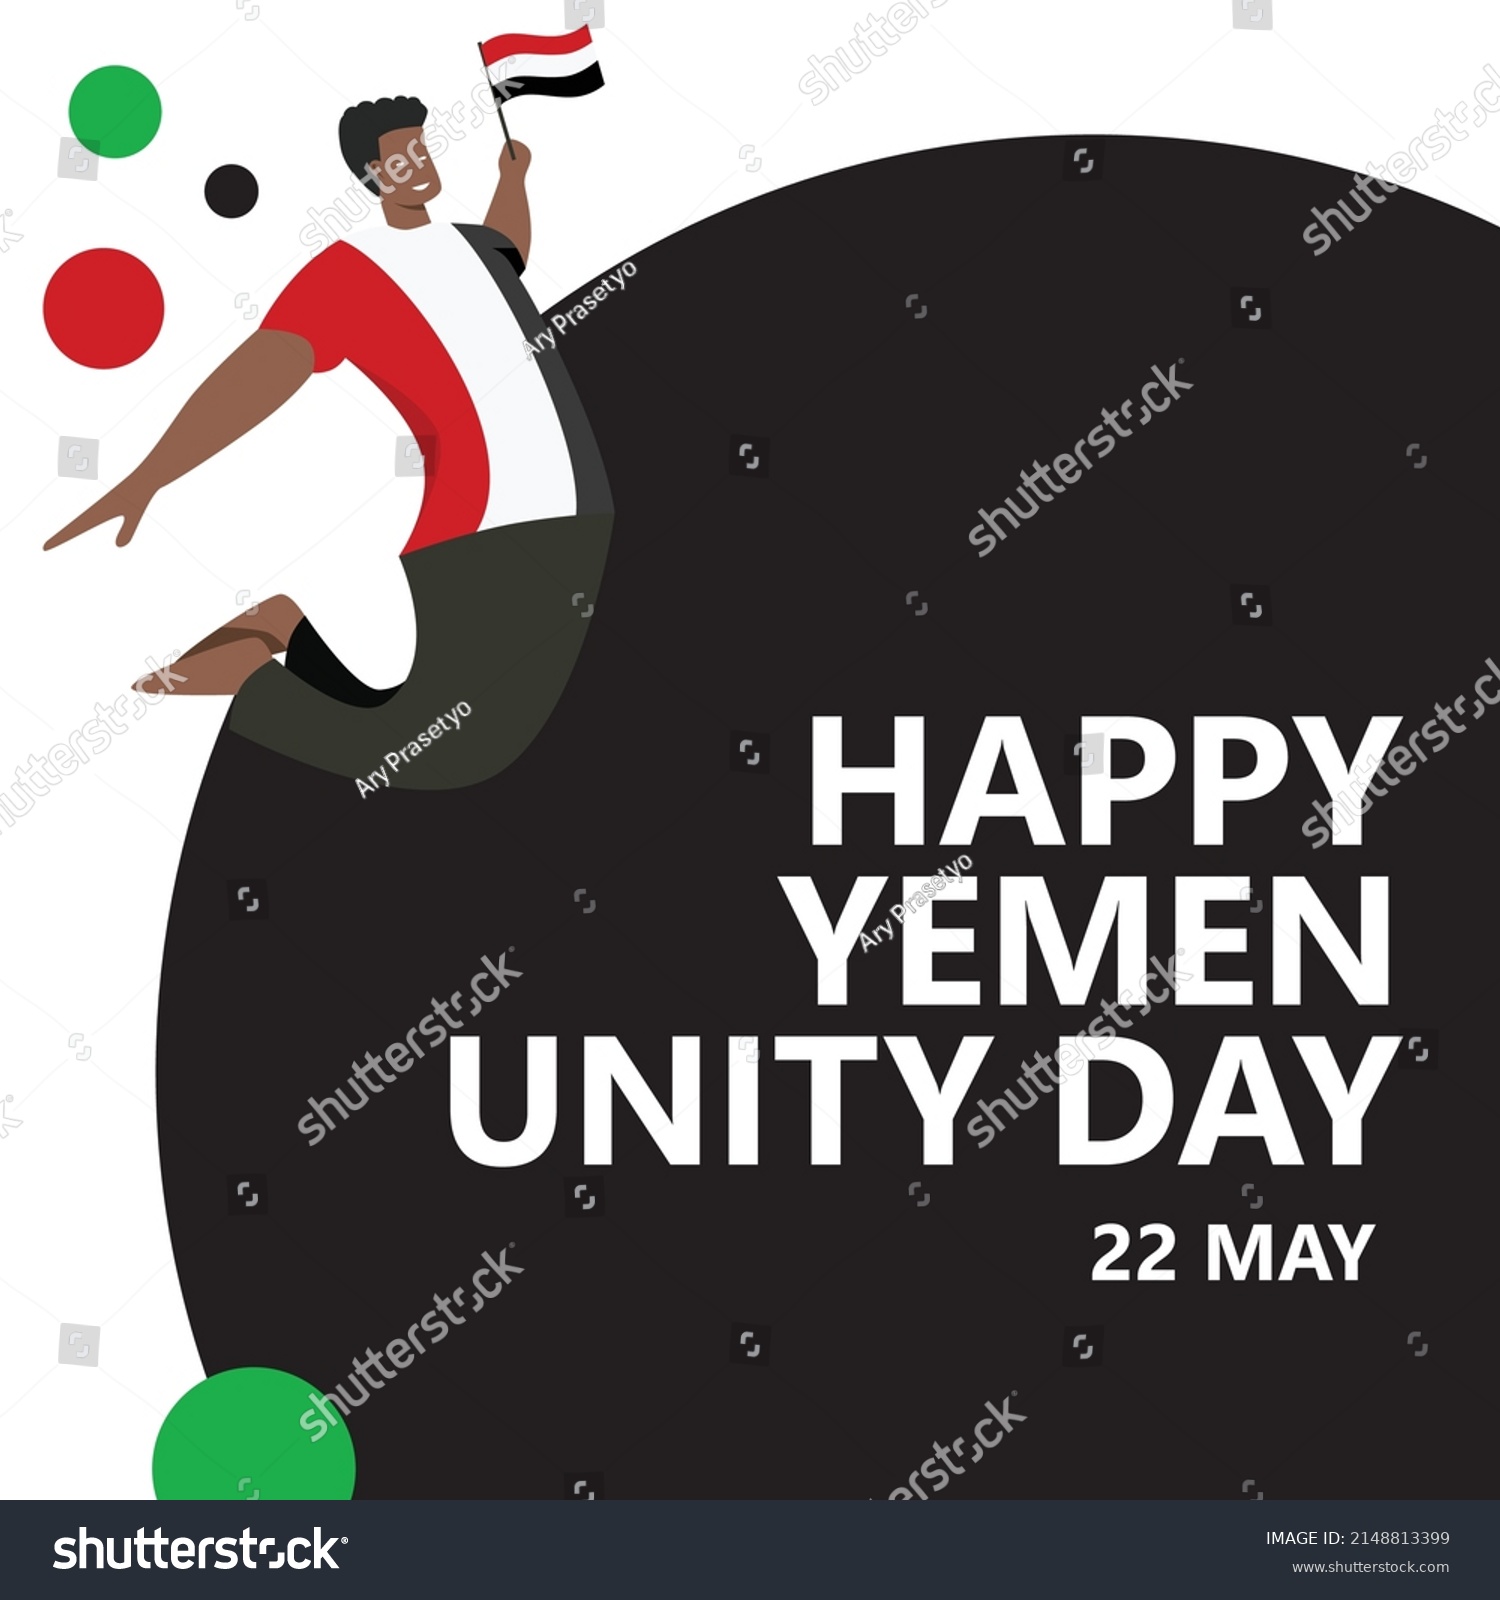 SVG of Yemen Unity day celebration vector illustration with a man jumping and holding the national flag. Middle East country public holiday celebrated annually on May 22. svg